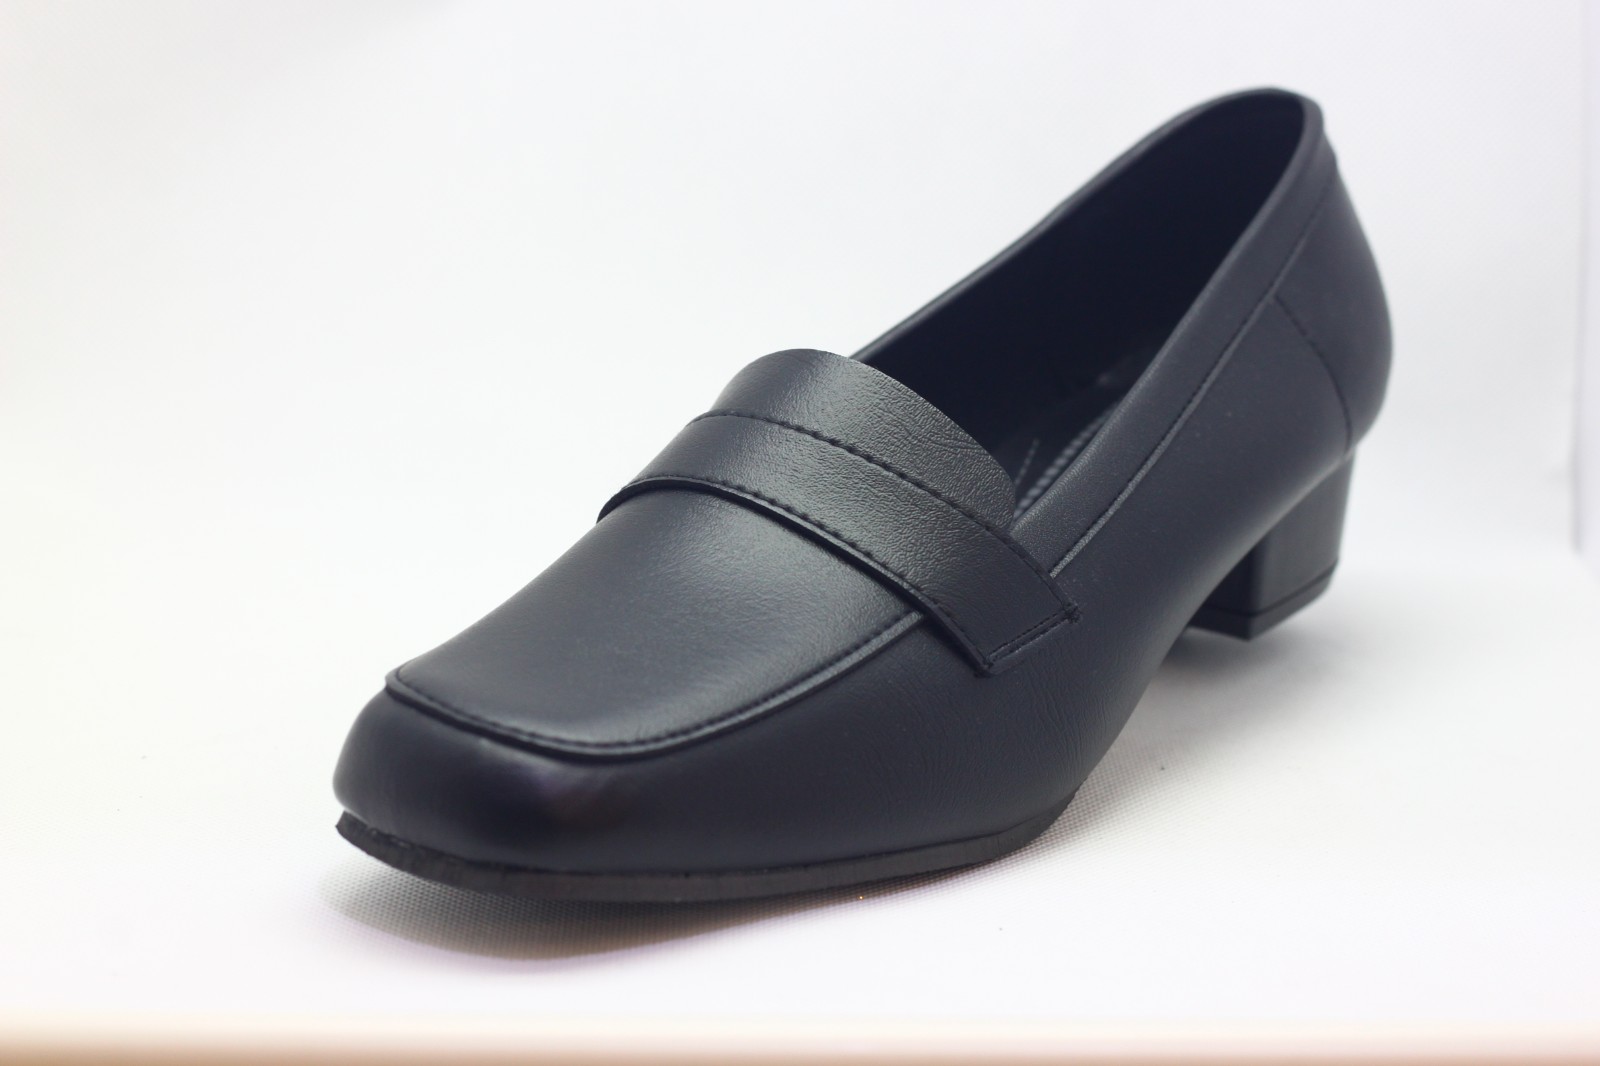 1 inch dress shoes